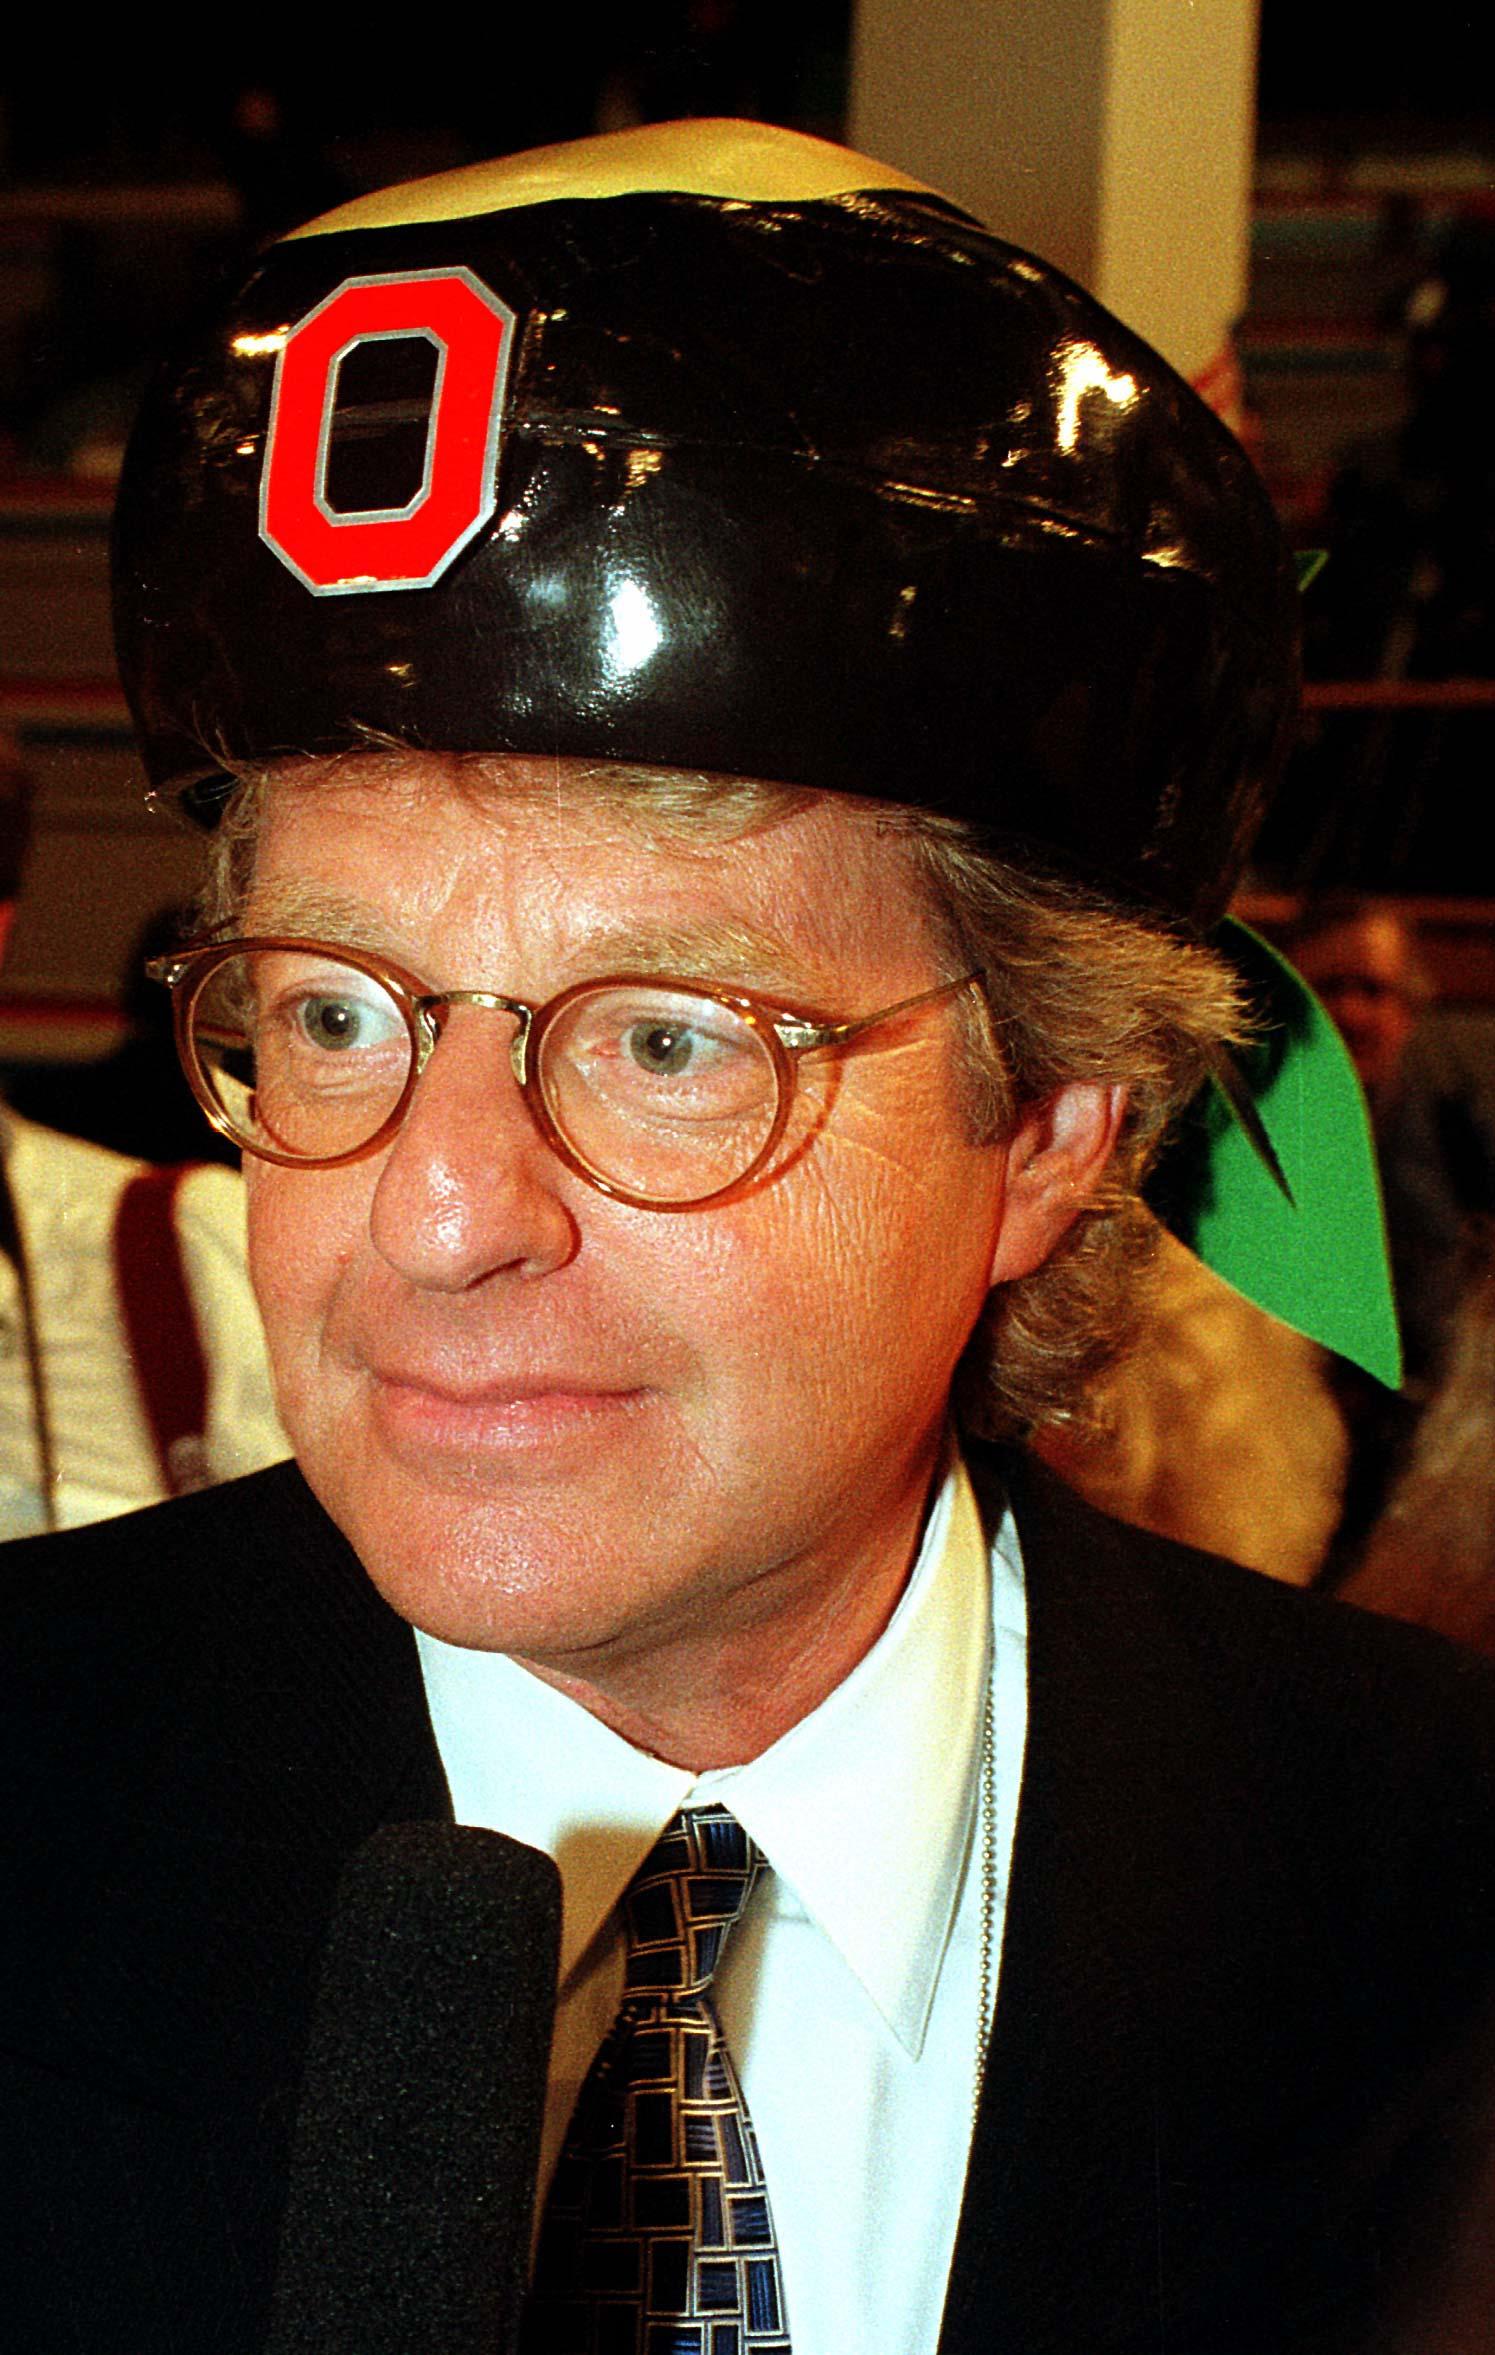 Talk show host Jerry Springer is interviewed on the floor of the 1996 Democratic National Convention in Chicago, Illinois on August 26, 1996